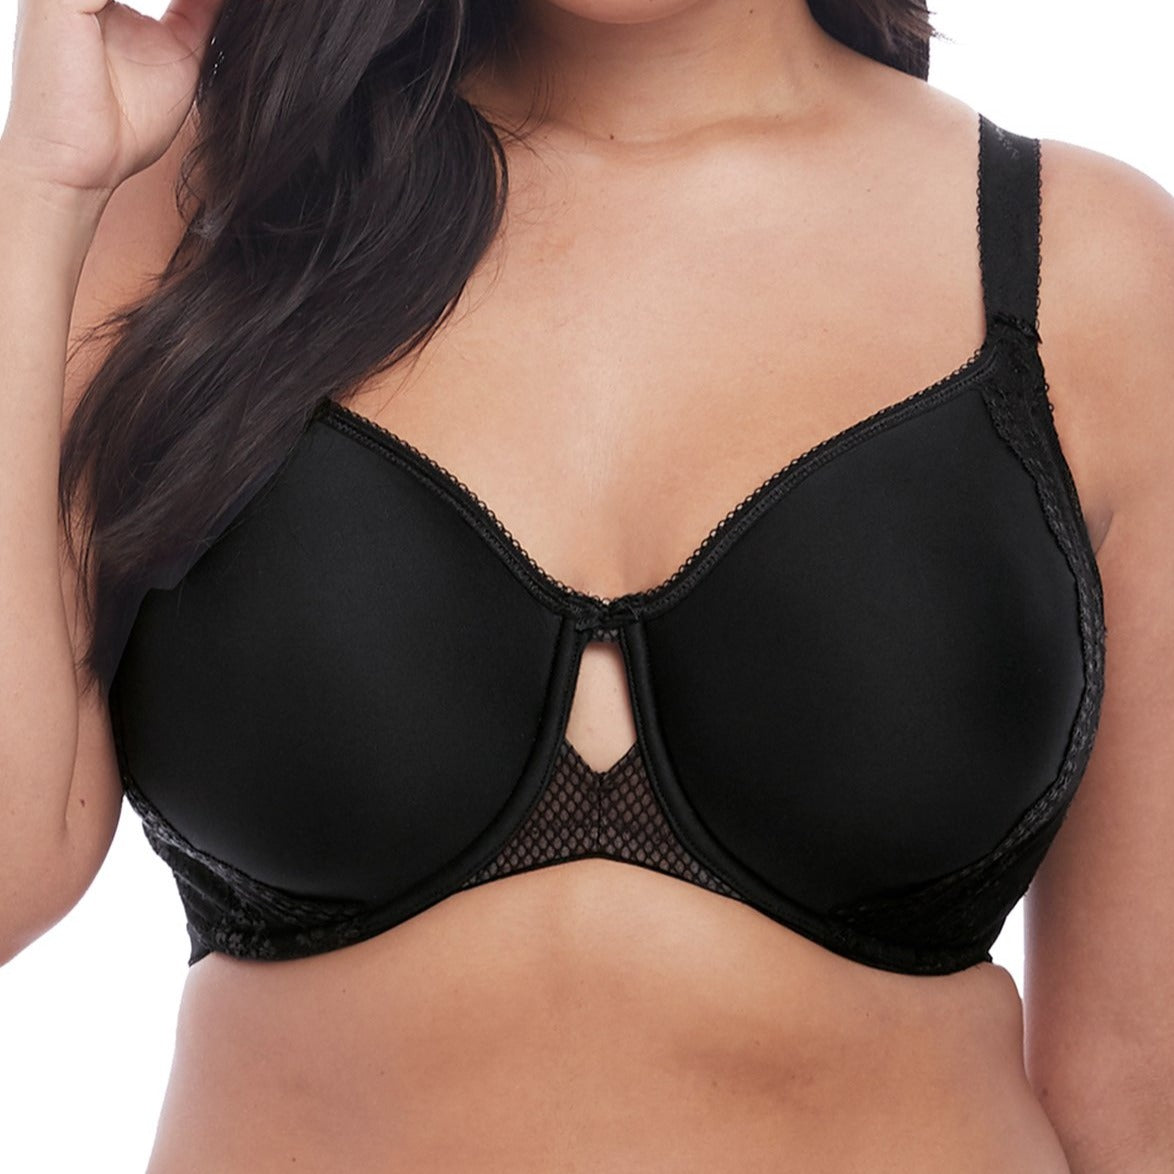 Elomi BLACK Smooth Underwire Moulded Convertible Strapless Bra, US 42DDD, UK  42E 